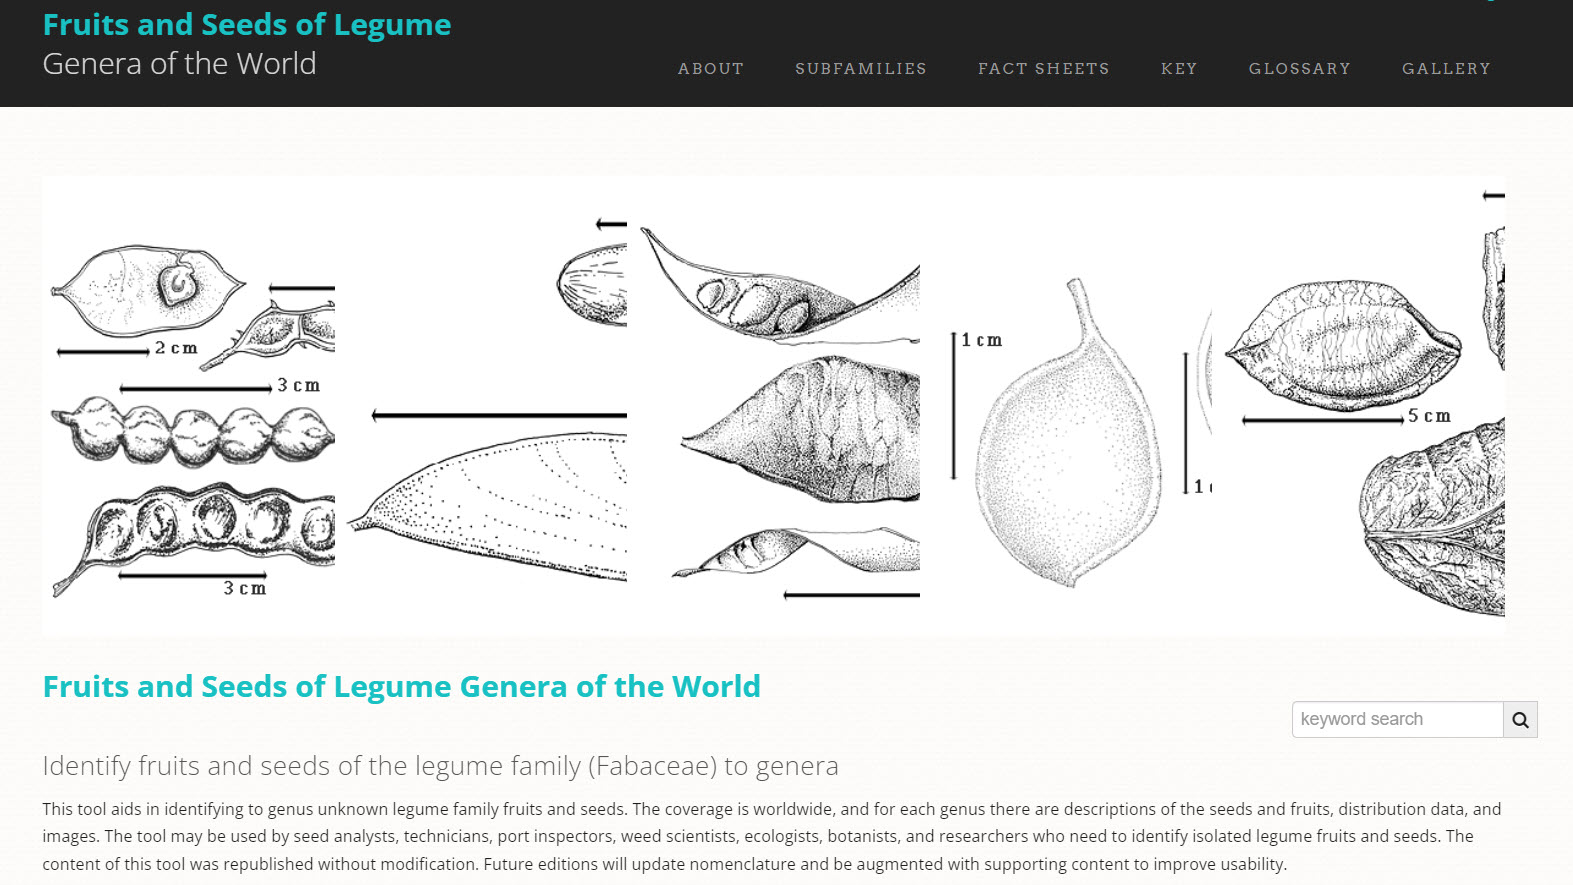 Re-release: Fruits and Seeds of Legume Genera of the World